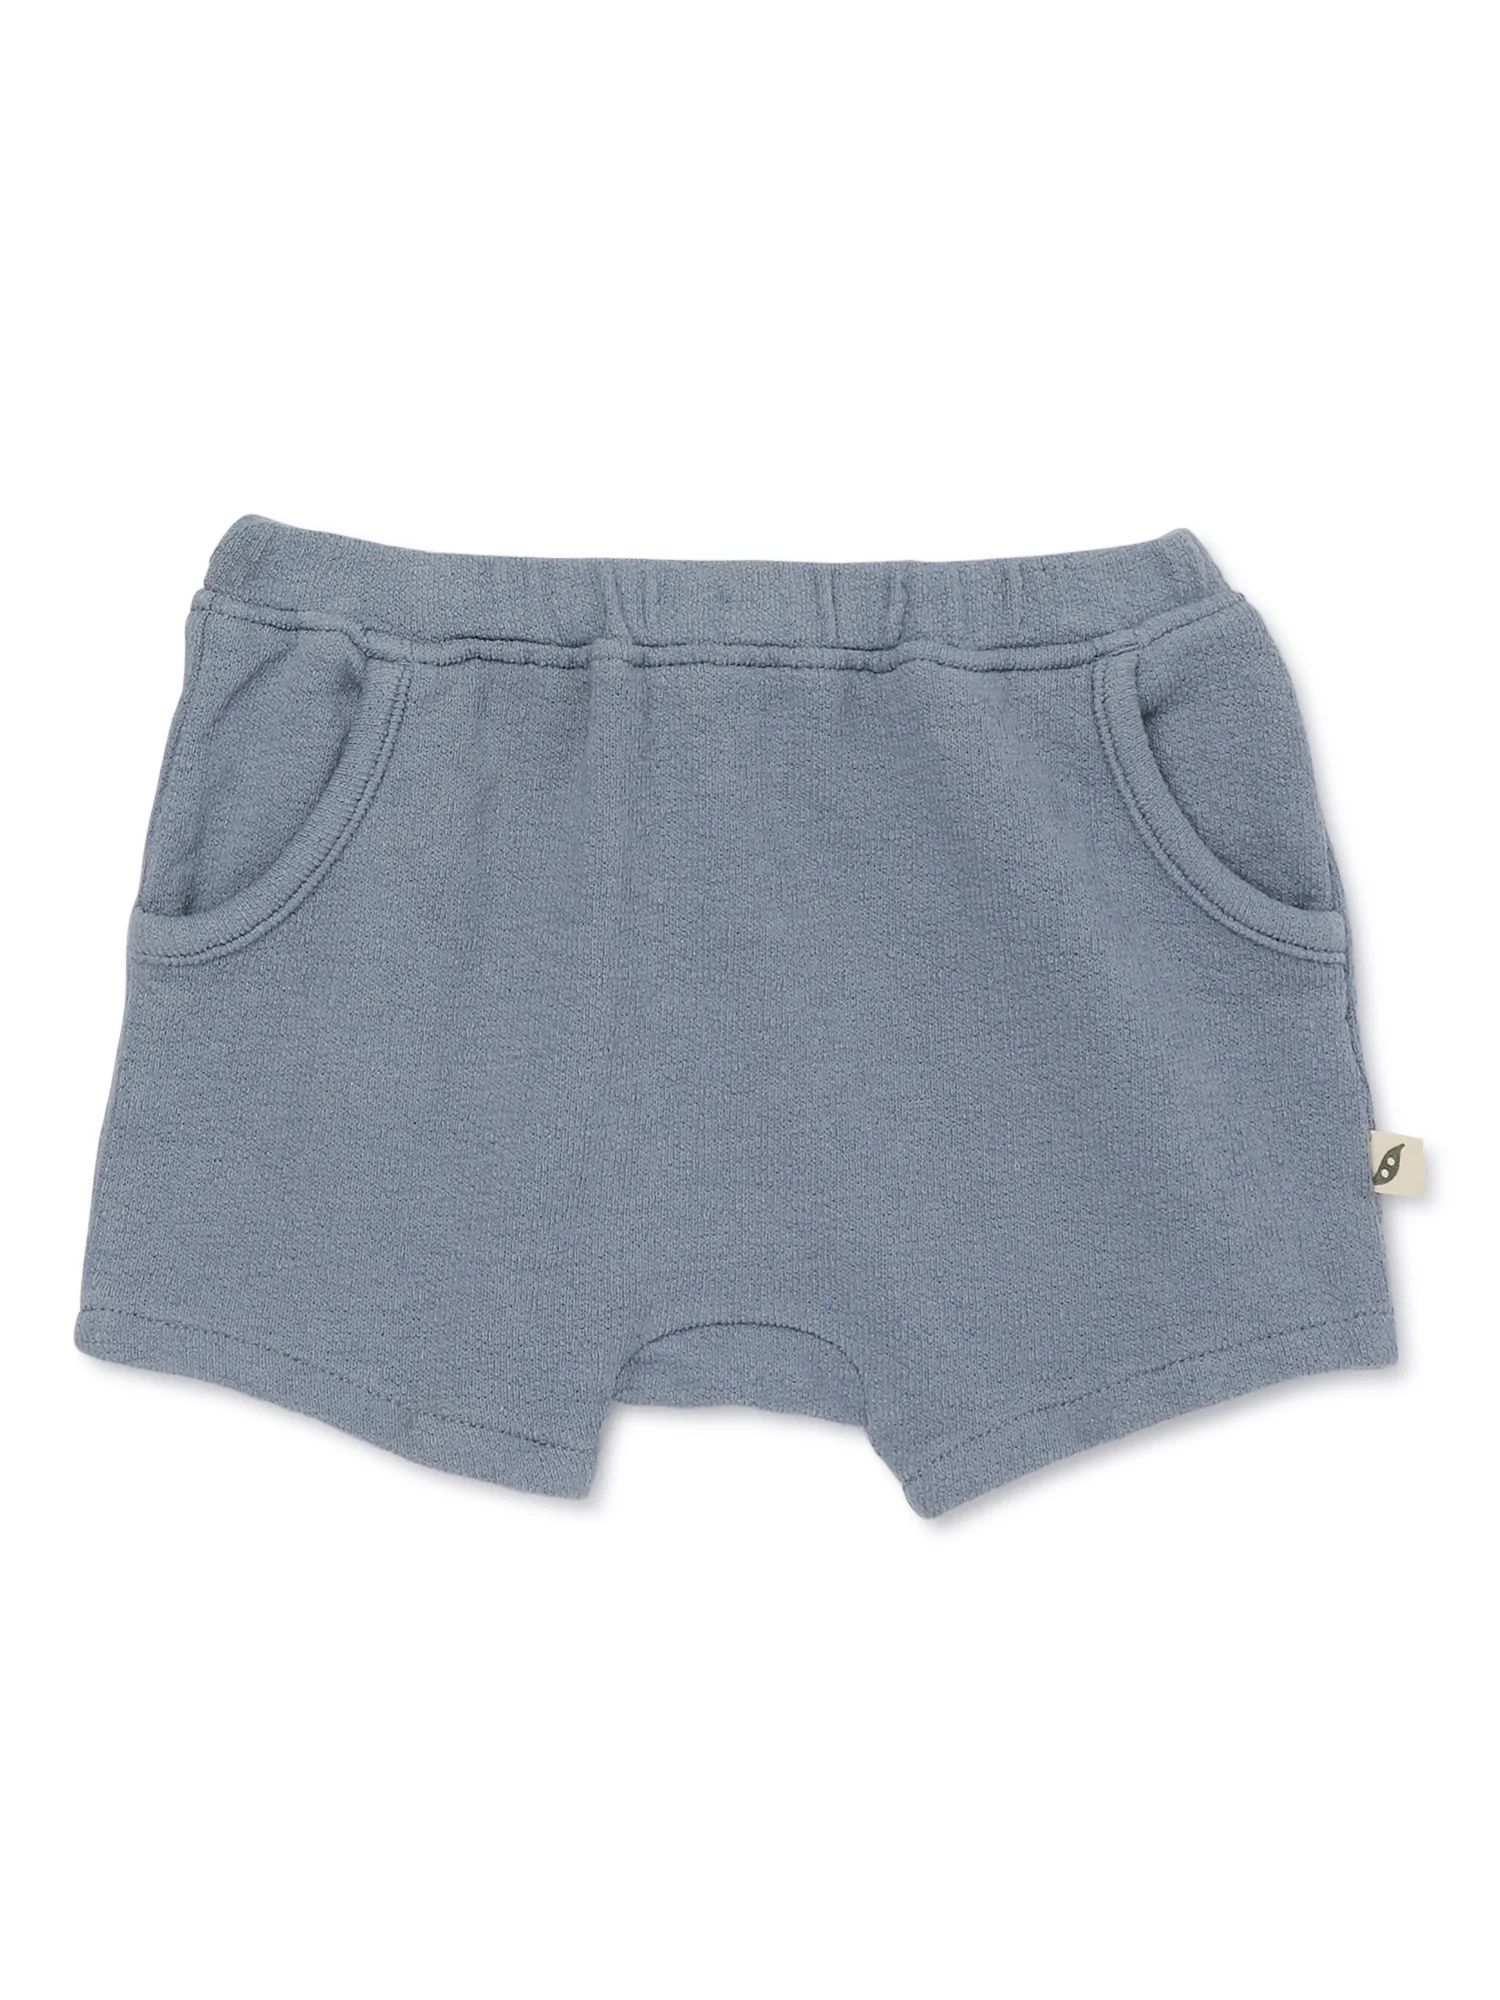 easy-peasy Baby Solid Shorts, Sizes 0-24 Months | Walmart (US)